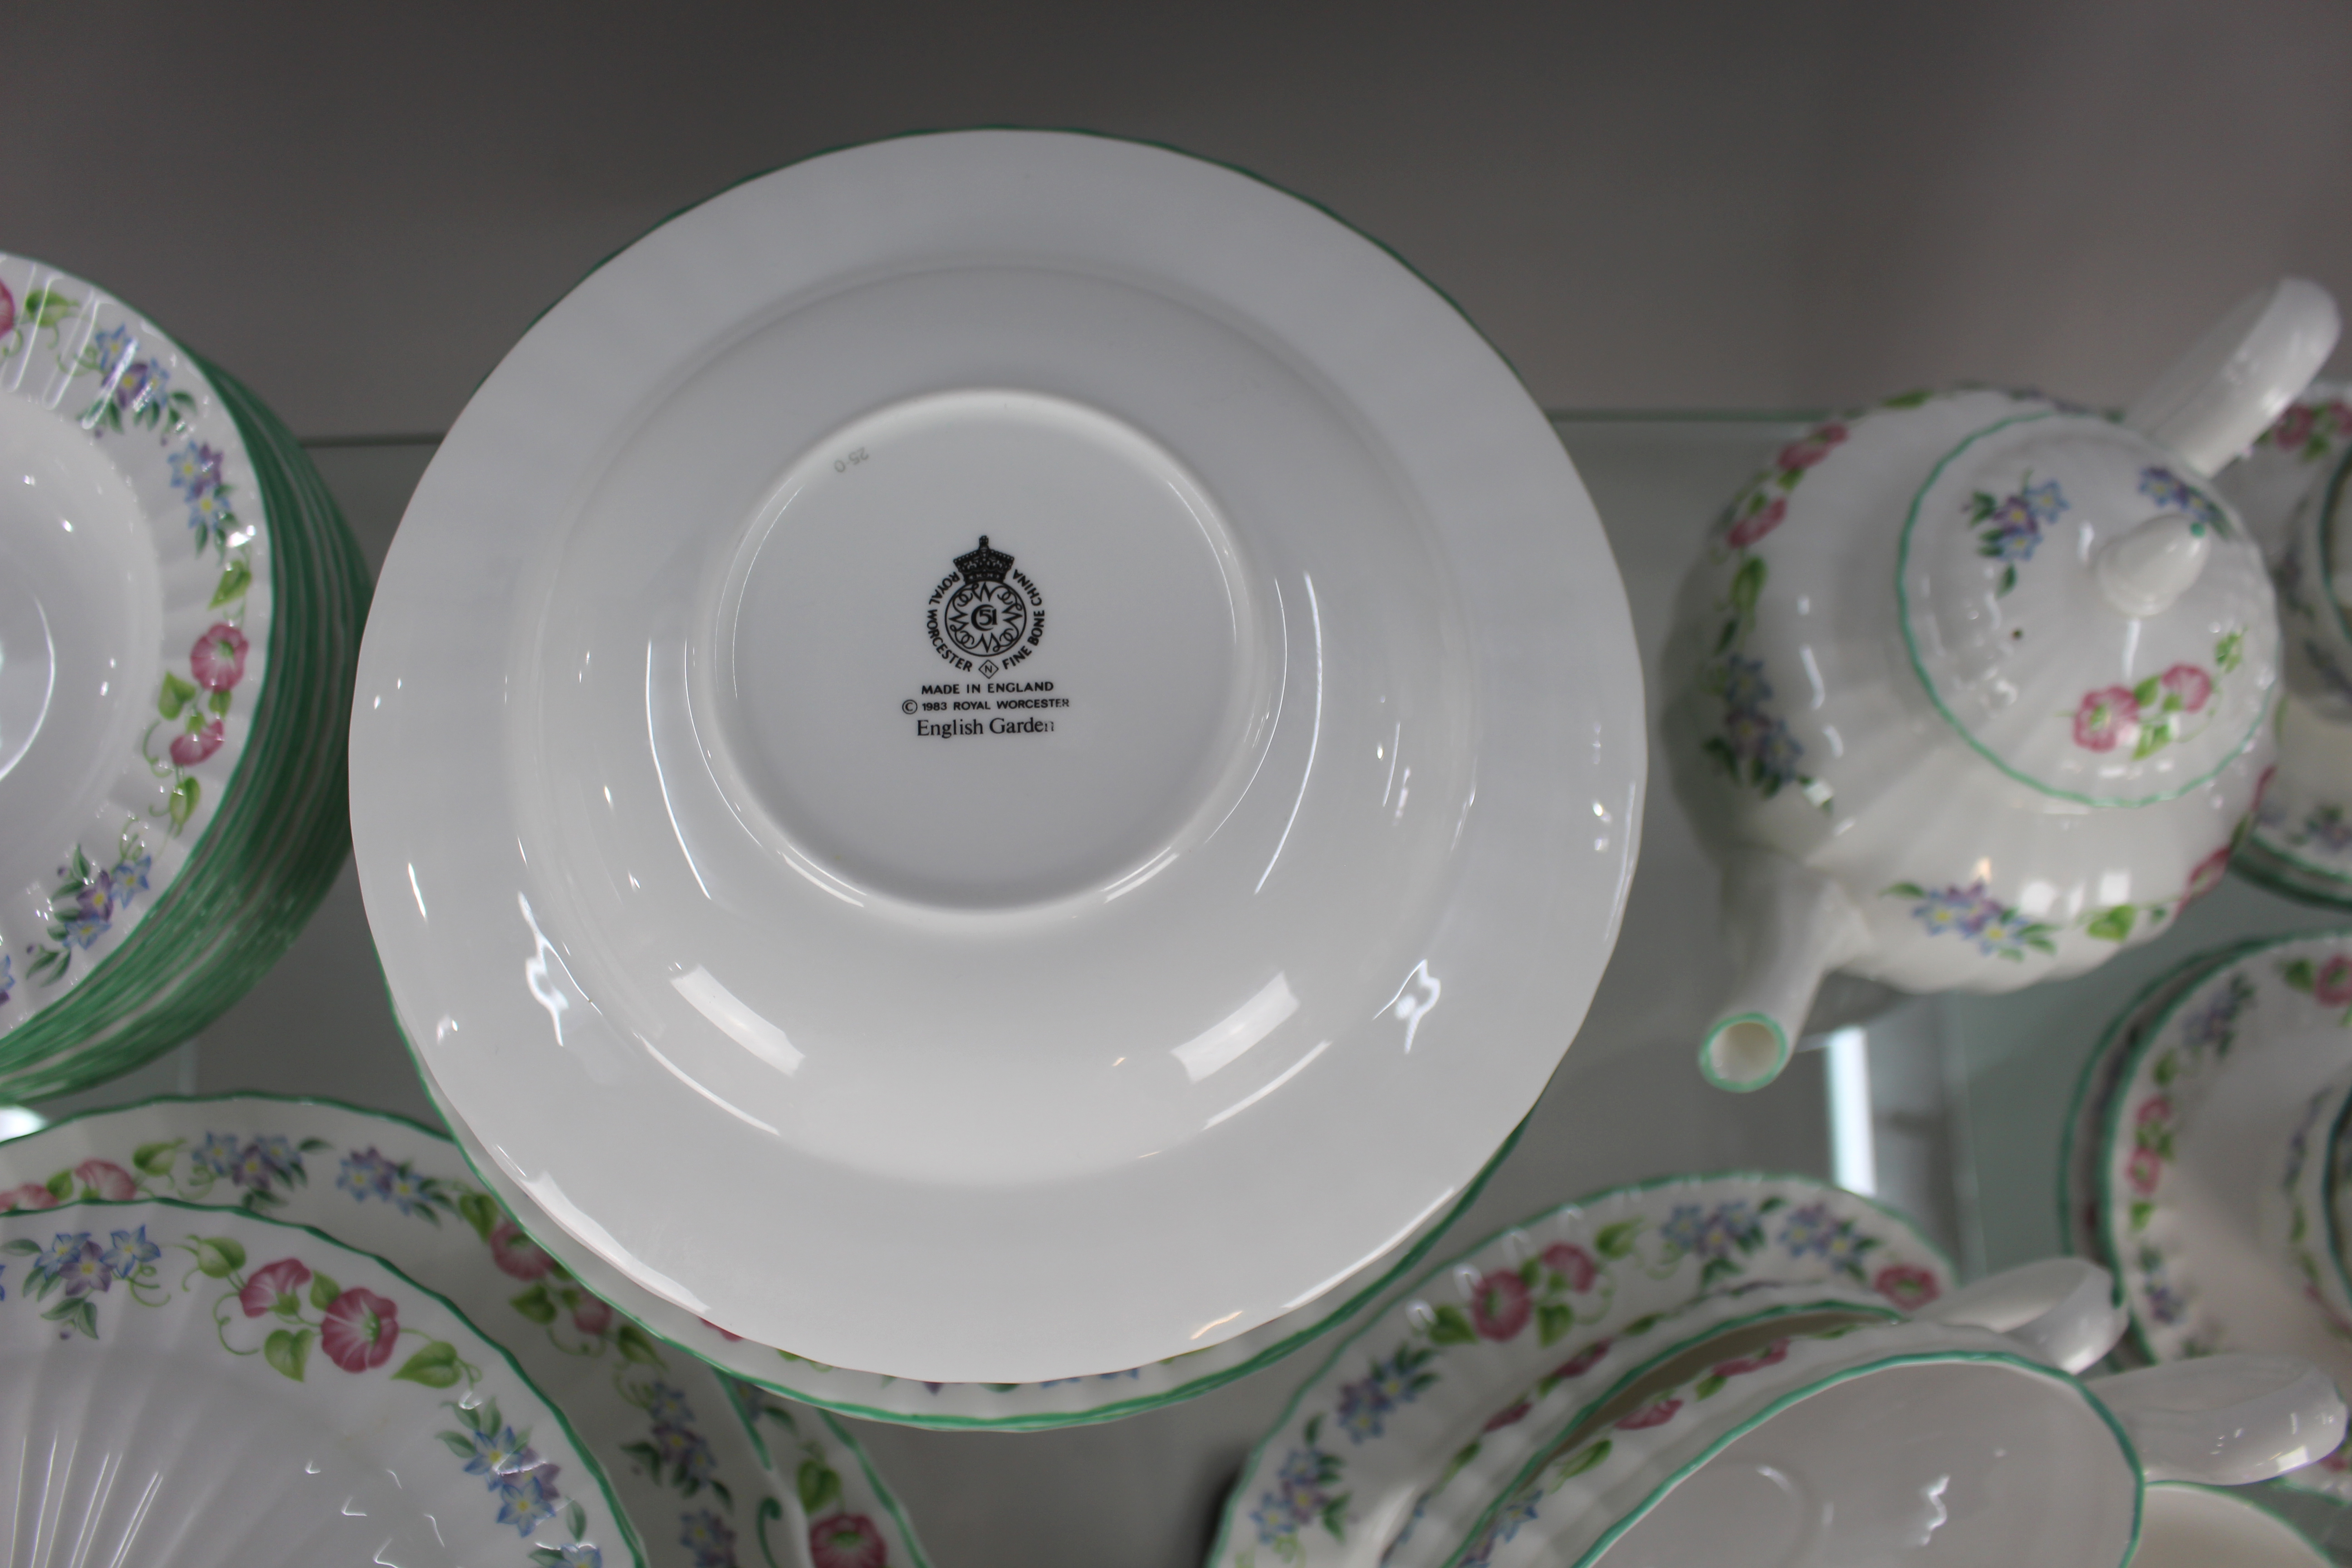 Royal Worcester English Garden 12 Place Dinner Service - Image 8 of 9